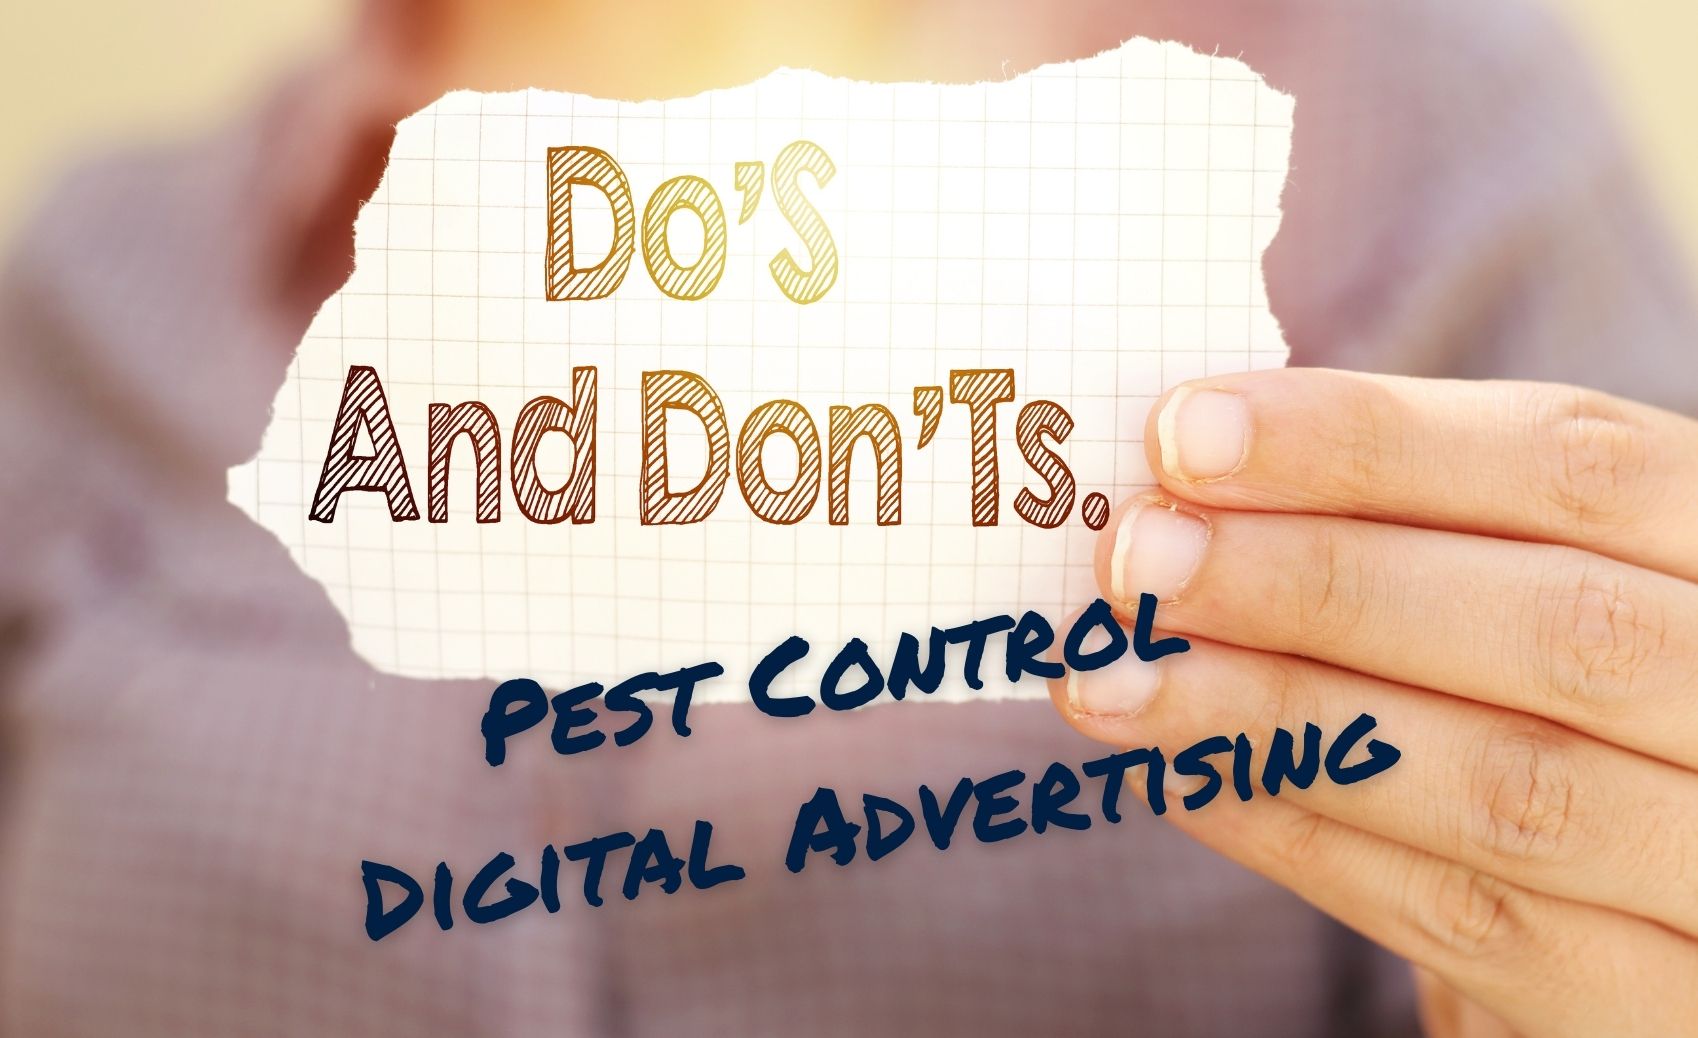 Pest Control Advertising Do's and Don'ts Blog Image Header